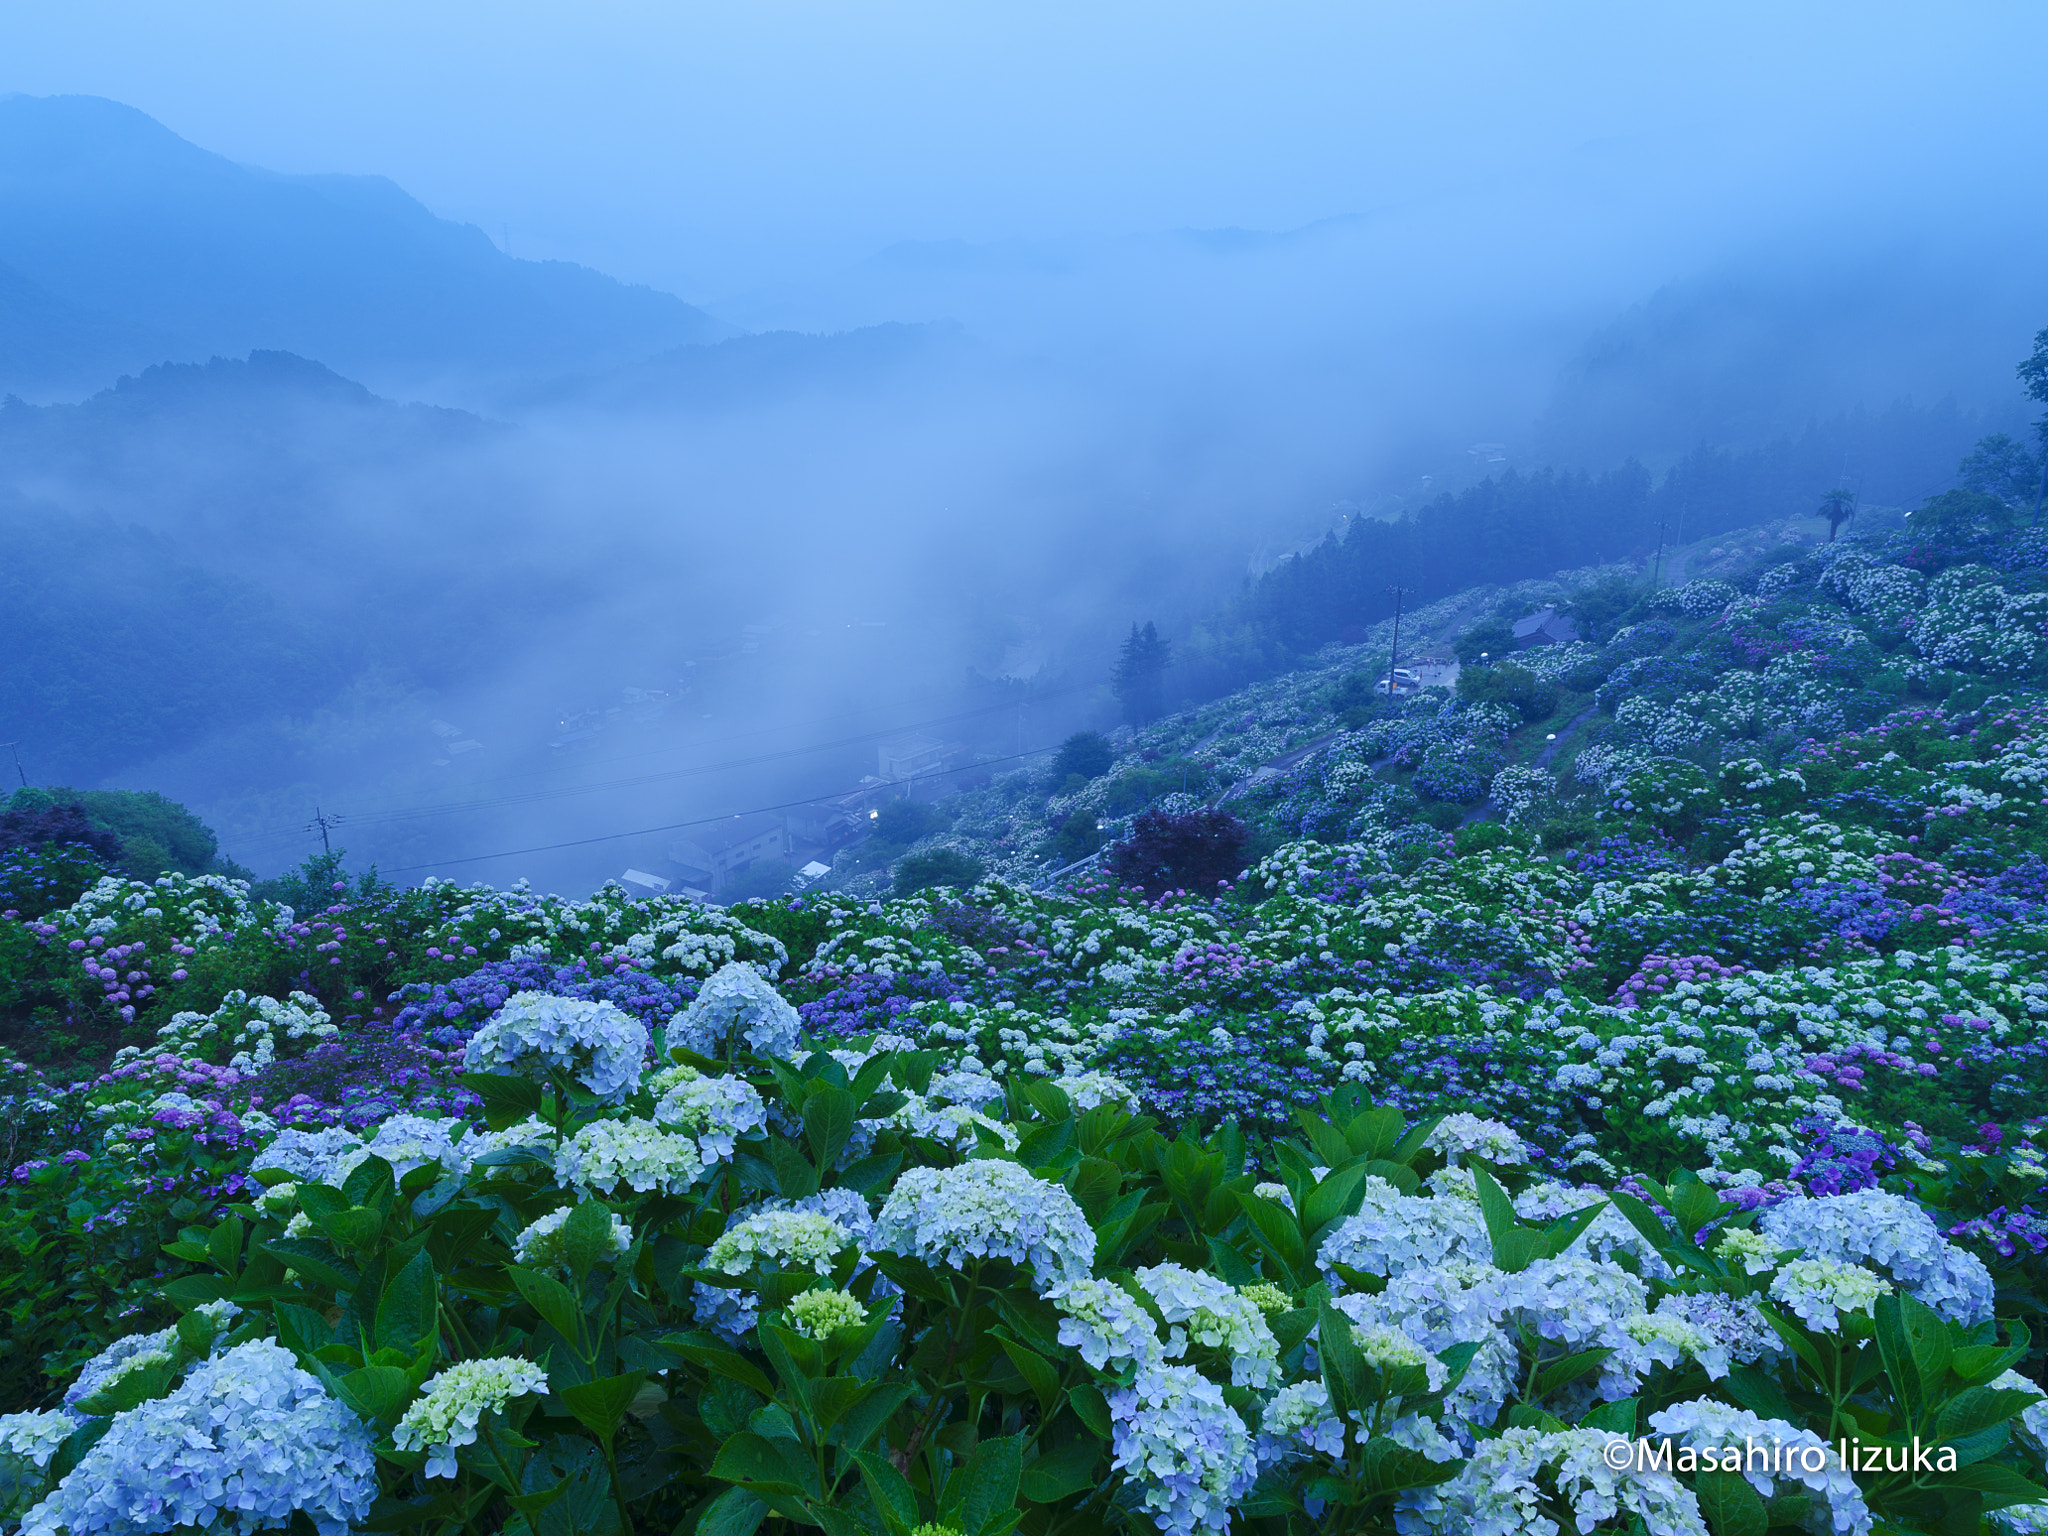 Pentax 645Z sample photo. Gregariousness of hydrangea in the fog photography